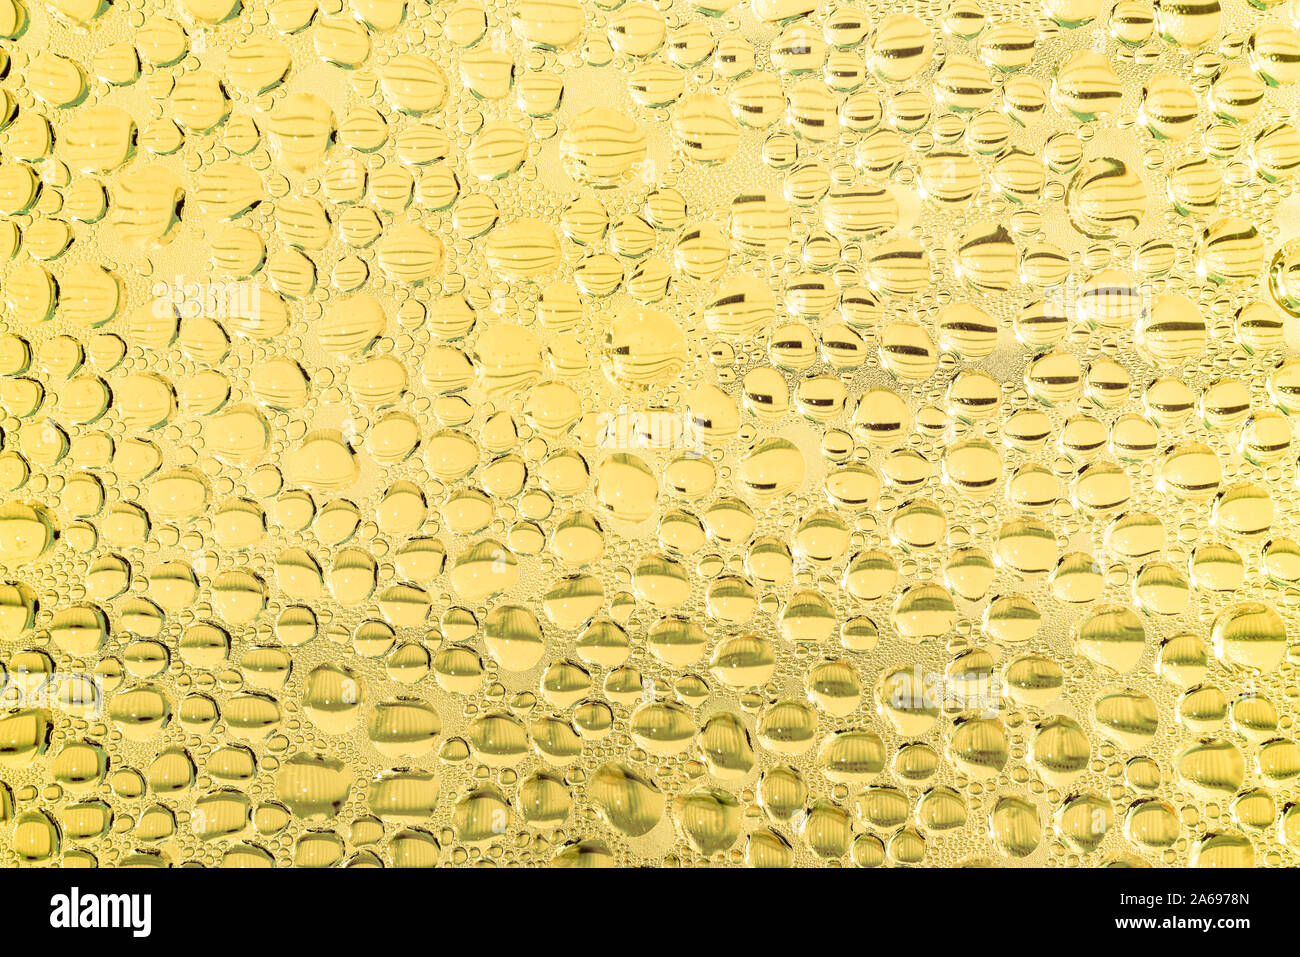 Glass of sparkling wine closeup with moisture condensation on the glass Stock Photo